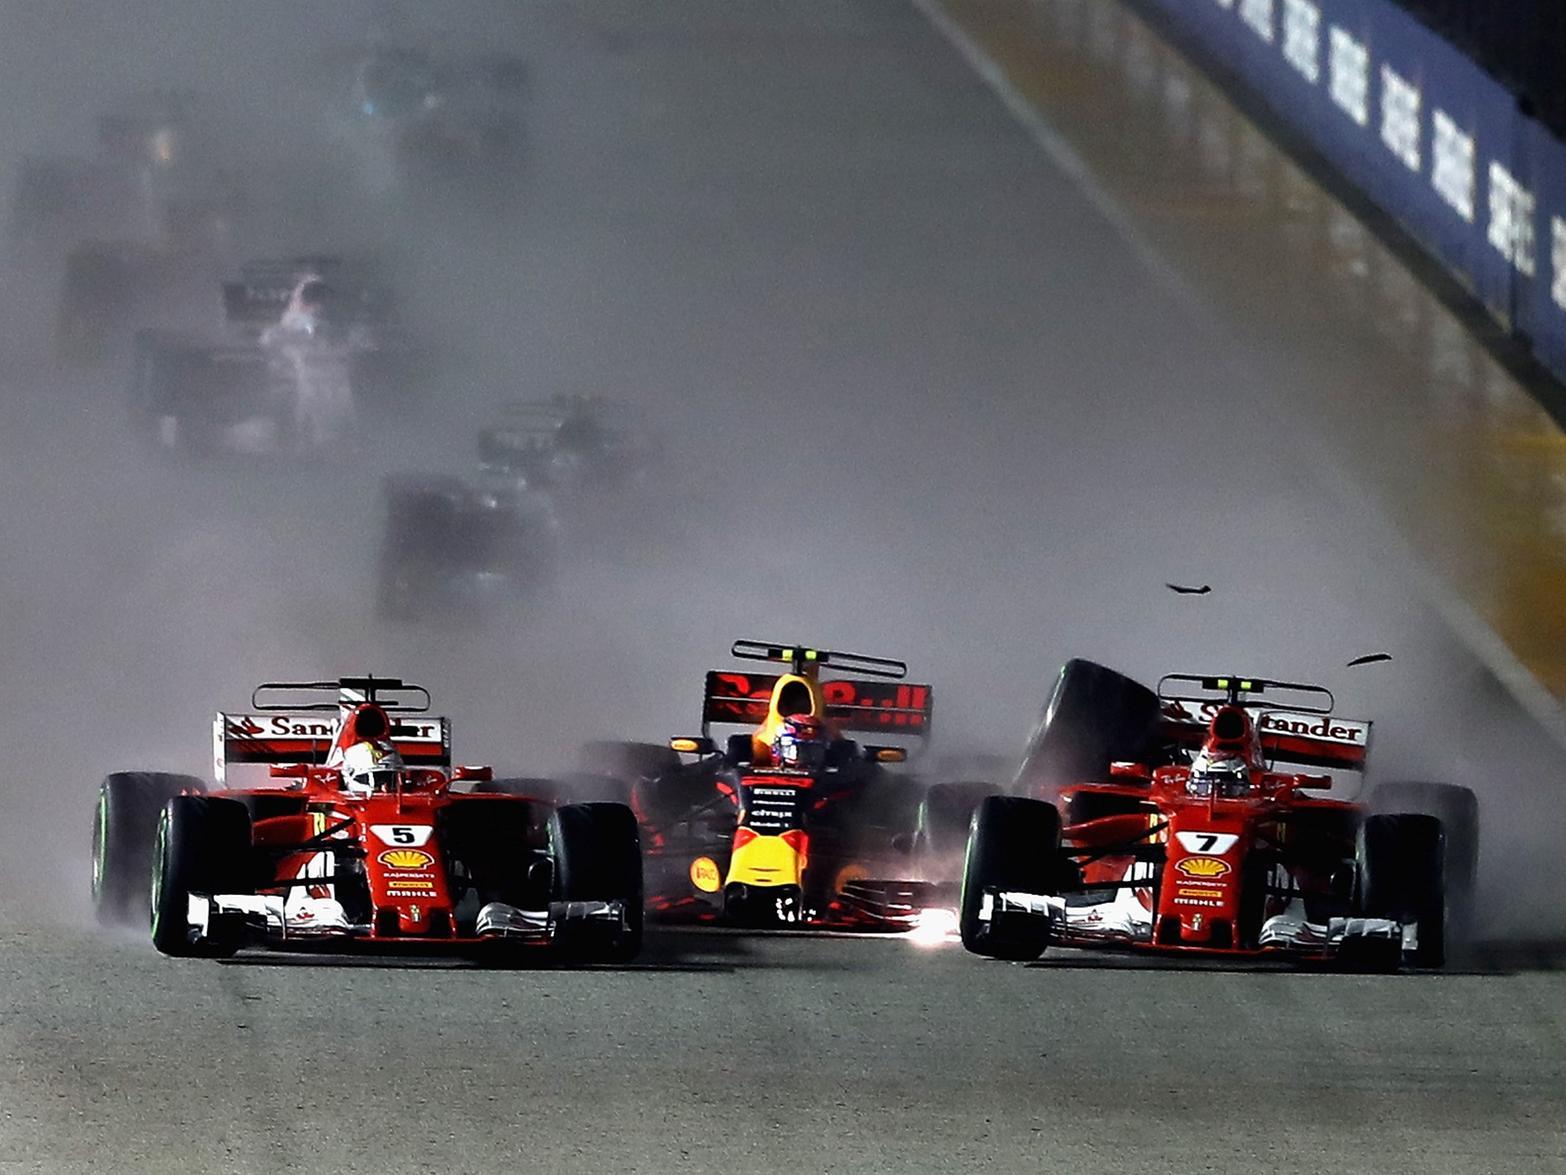 The 2017 season had been disappointing for the Dutchman. Qualifying on the front row, Verstappen's race ended at the first corner in Singapore after a crash with both Ferraris.